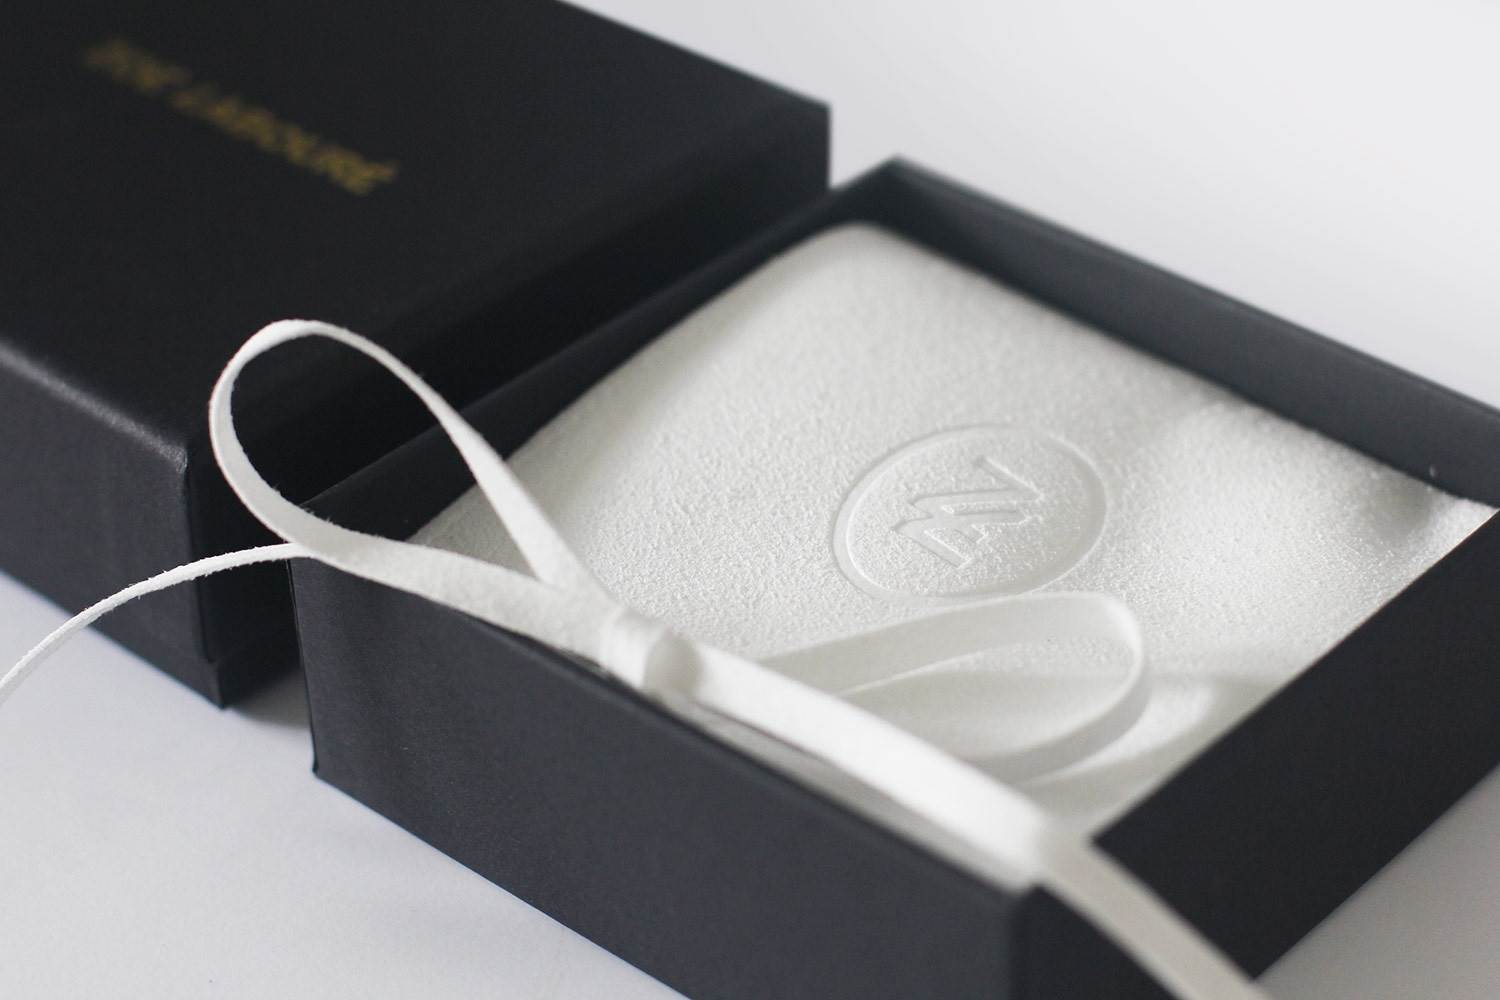 Packaging for jewellery brand design Zoe Laboure